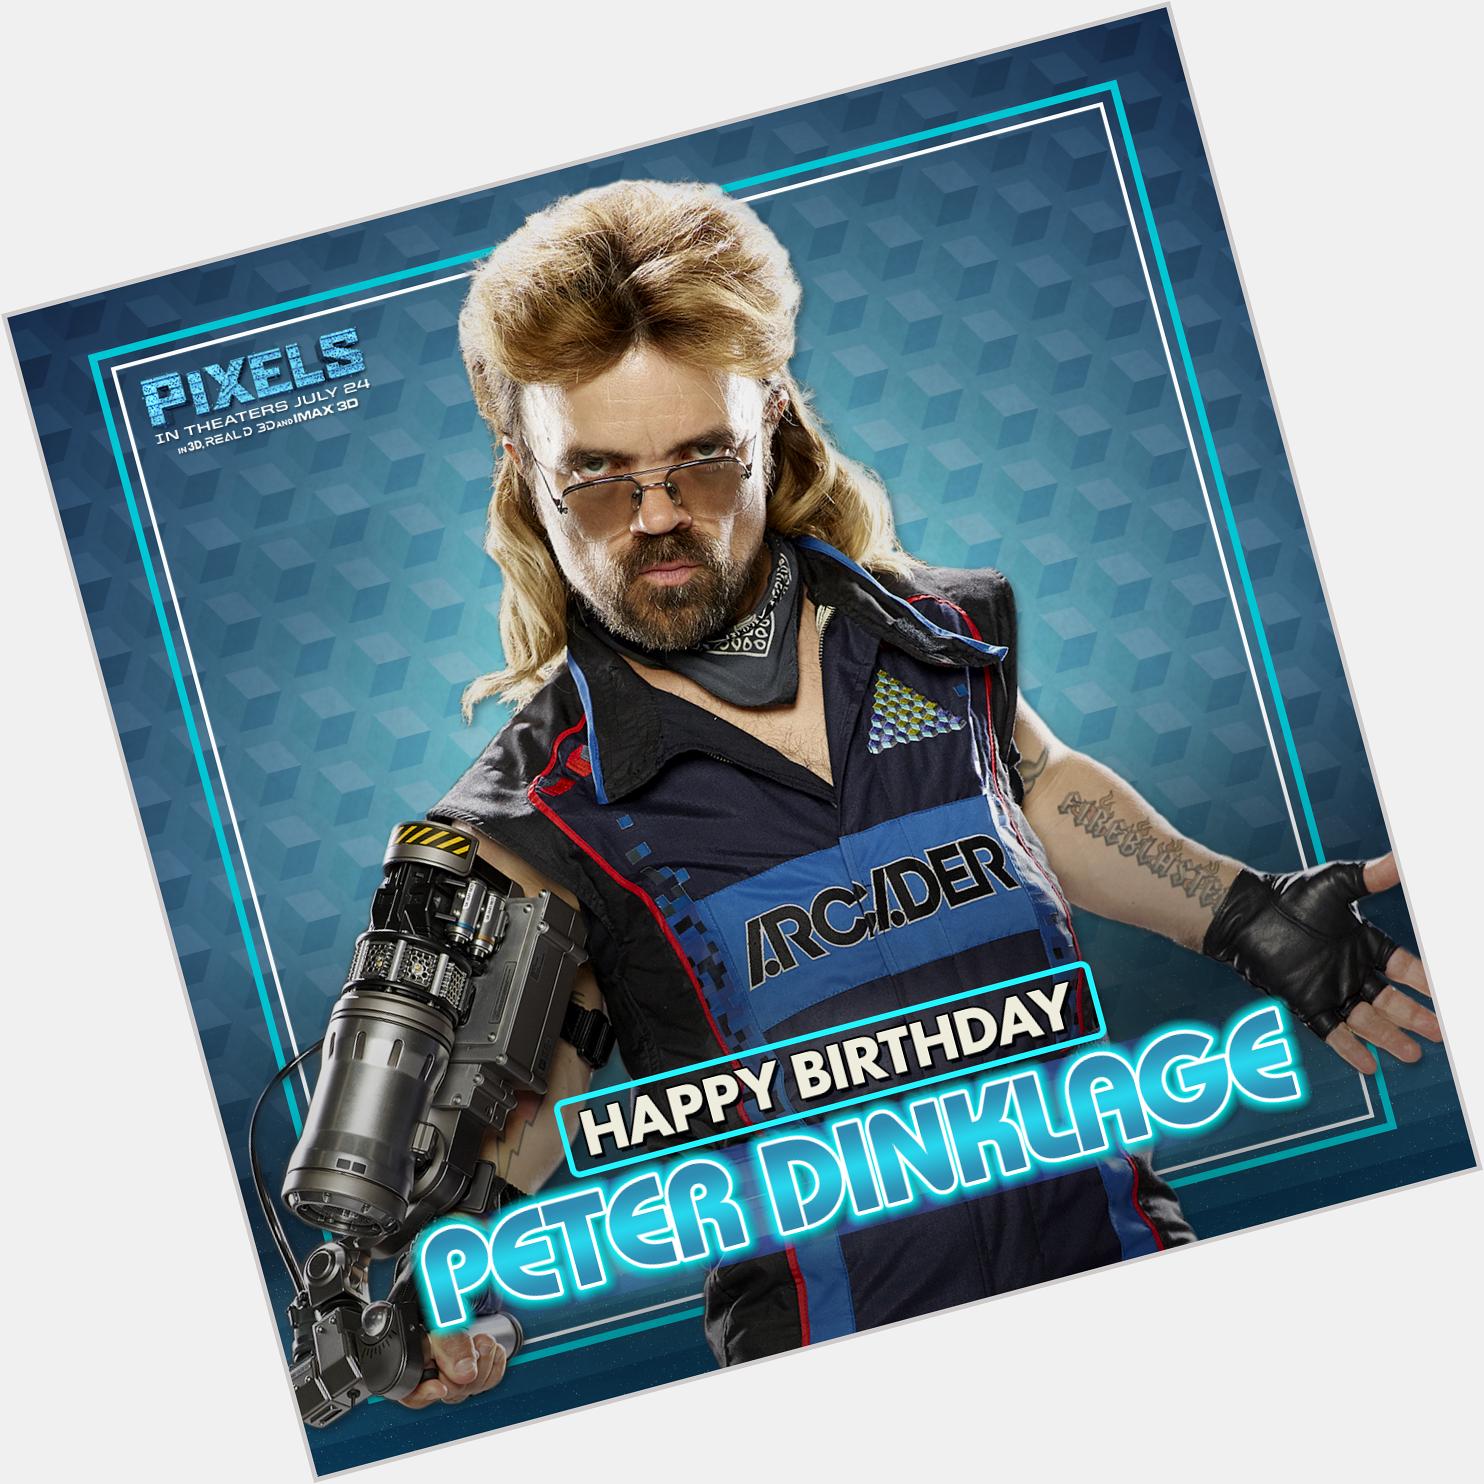 Happy Birthday Peter Dinklage! See the Donkey Kong champion of the world in action July 24. 